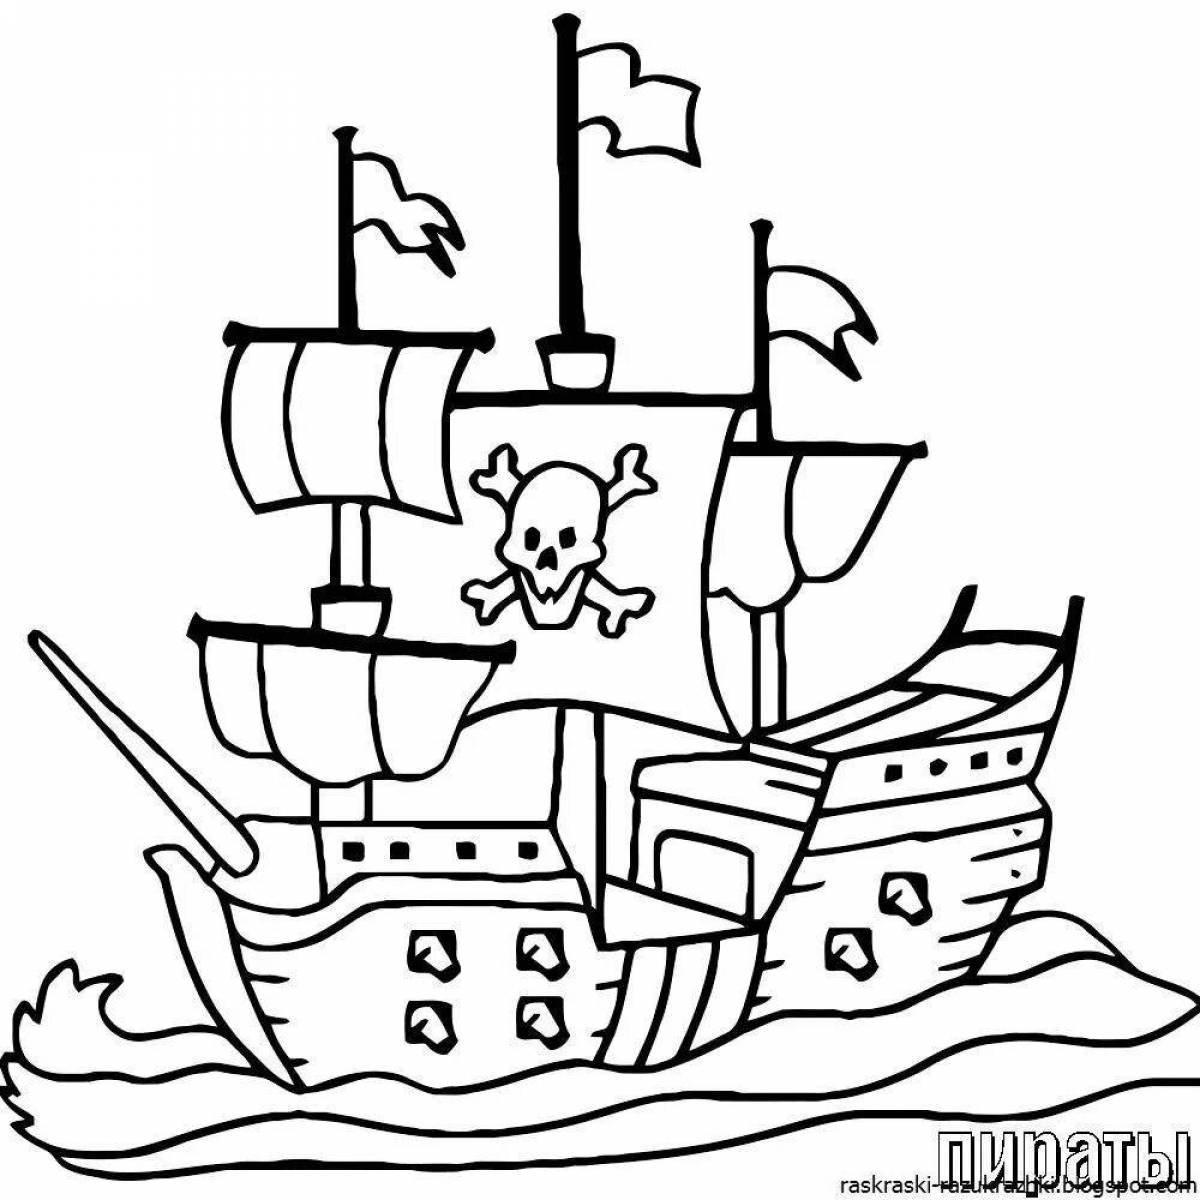 Awesome ship coloring page for 5-6 year olds